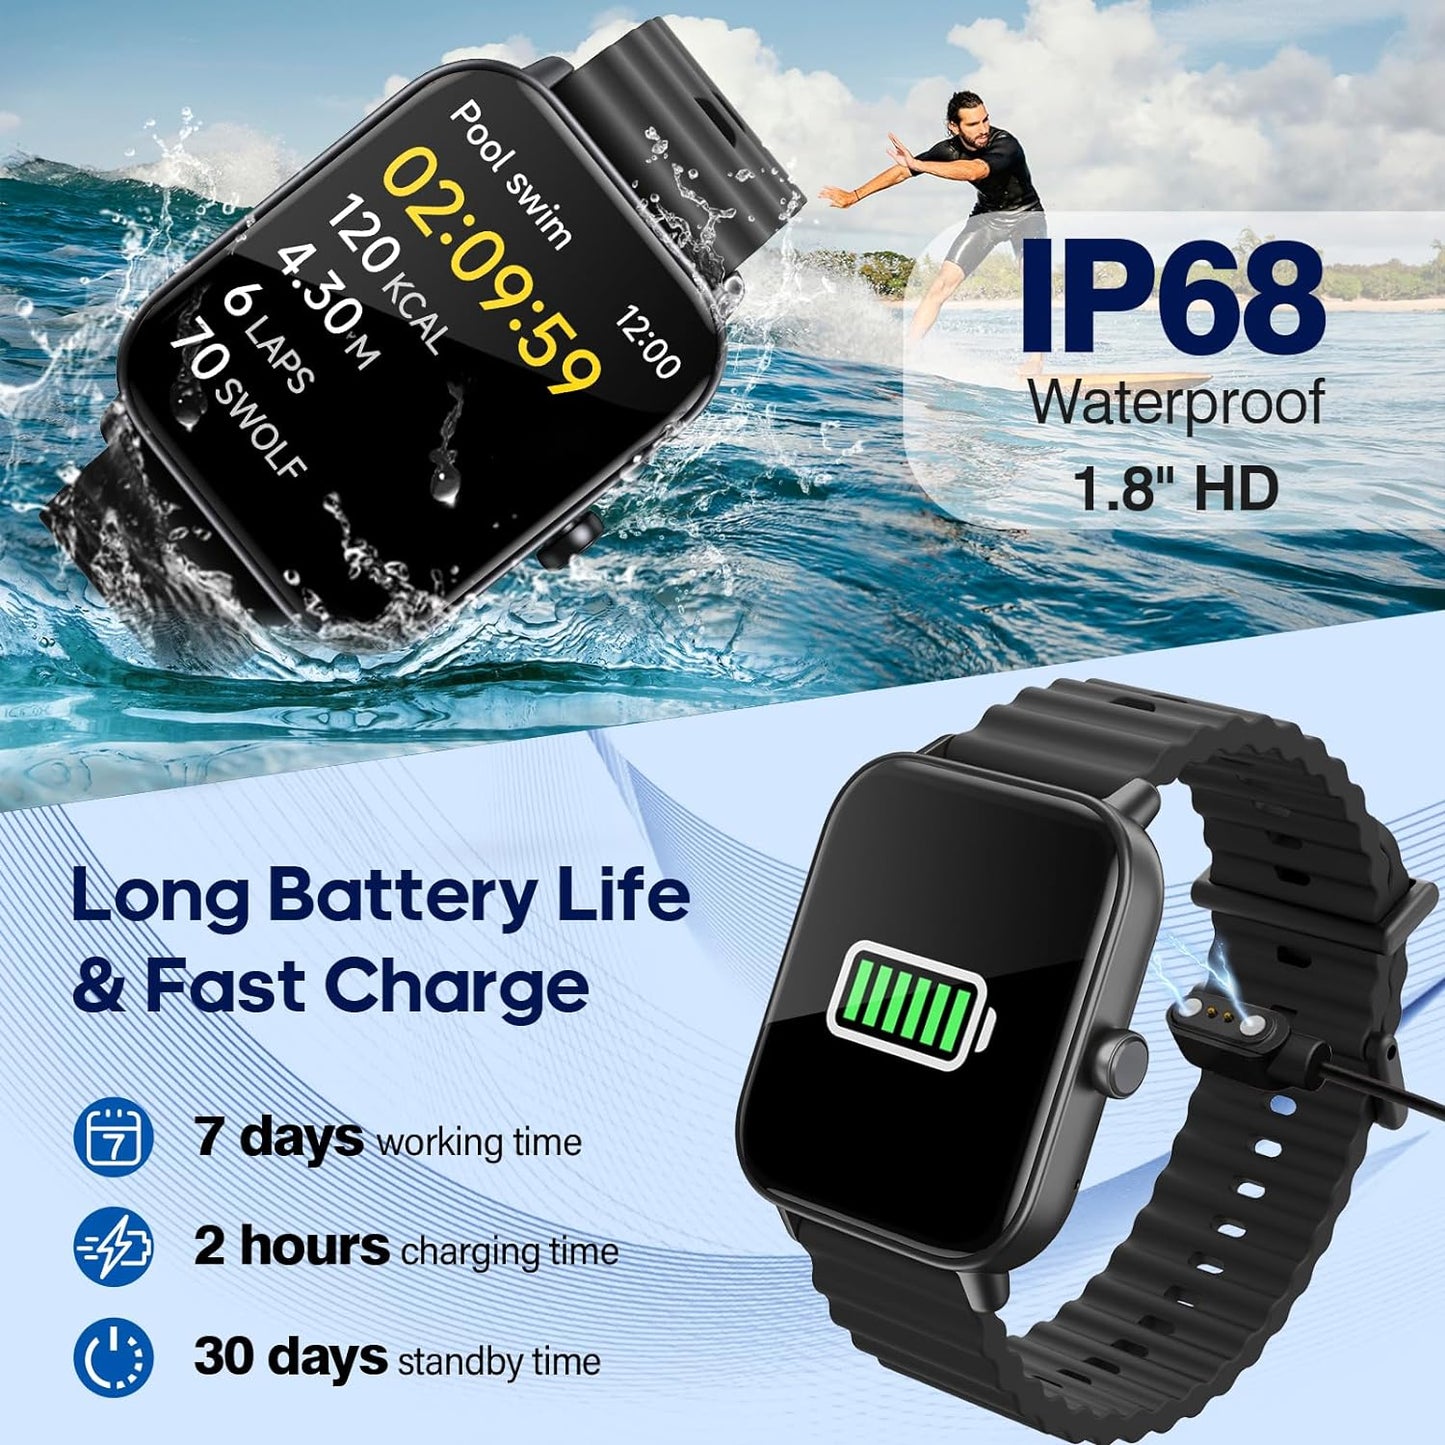 New Smart Watch for Men Women with Bluetooth Call, Fitness Trackers Watch with Heart Rate Sleep Monitor, Alexa Built-in 1.8" DIY Dial 100 Sports Modes IP68 Waterproof Smartwatch for iOS (Black)